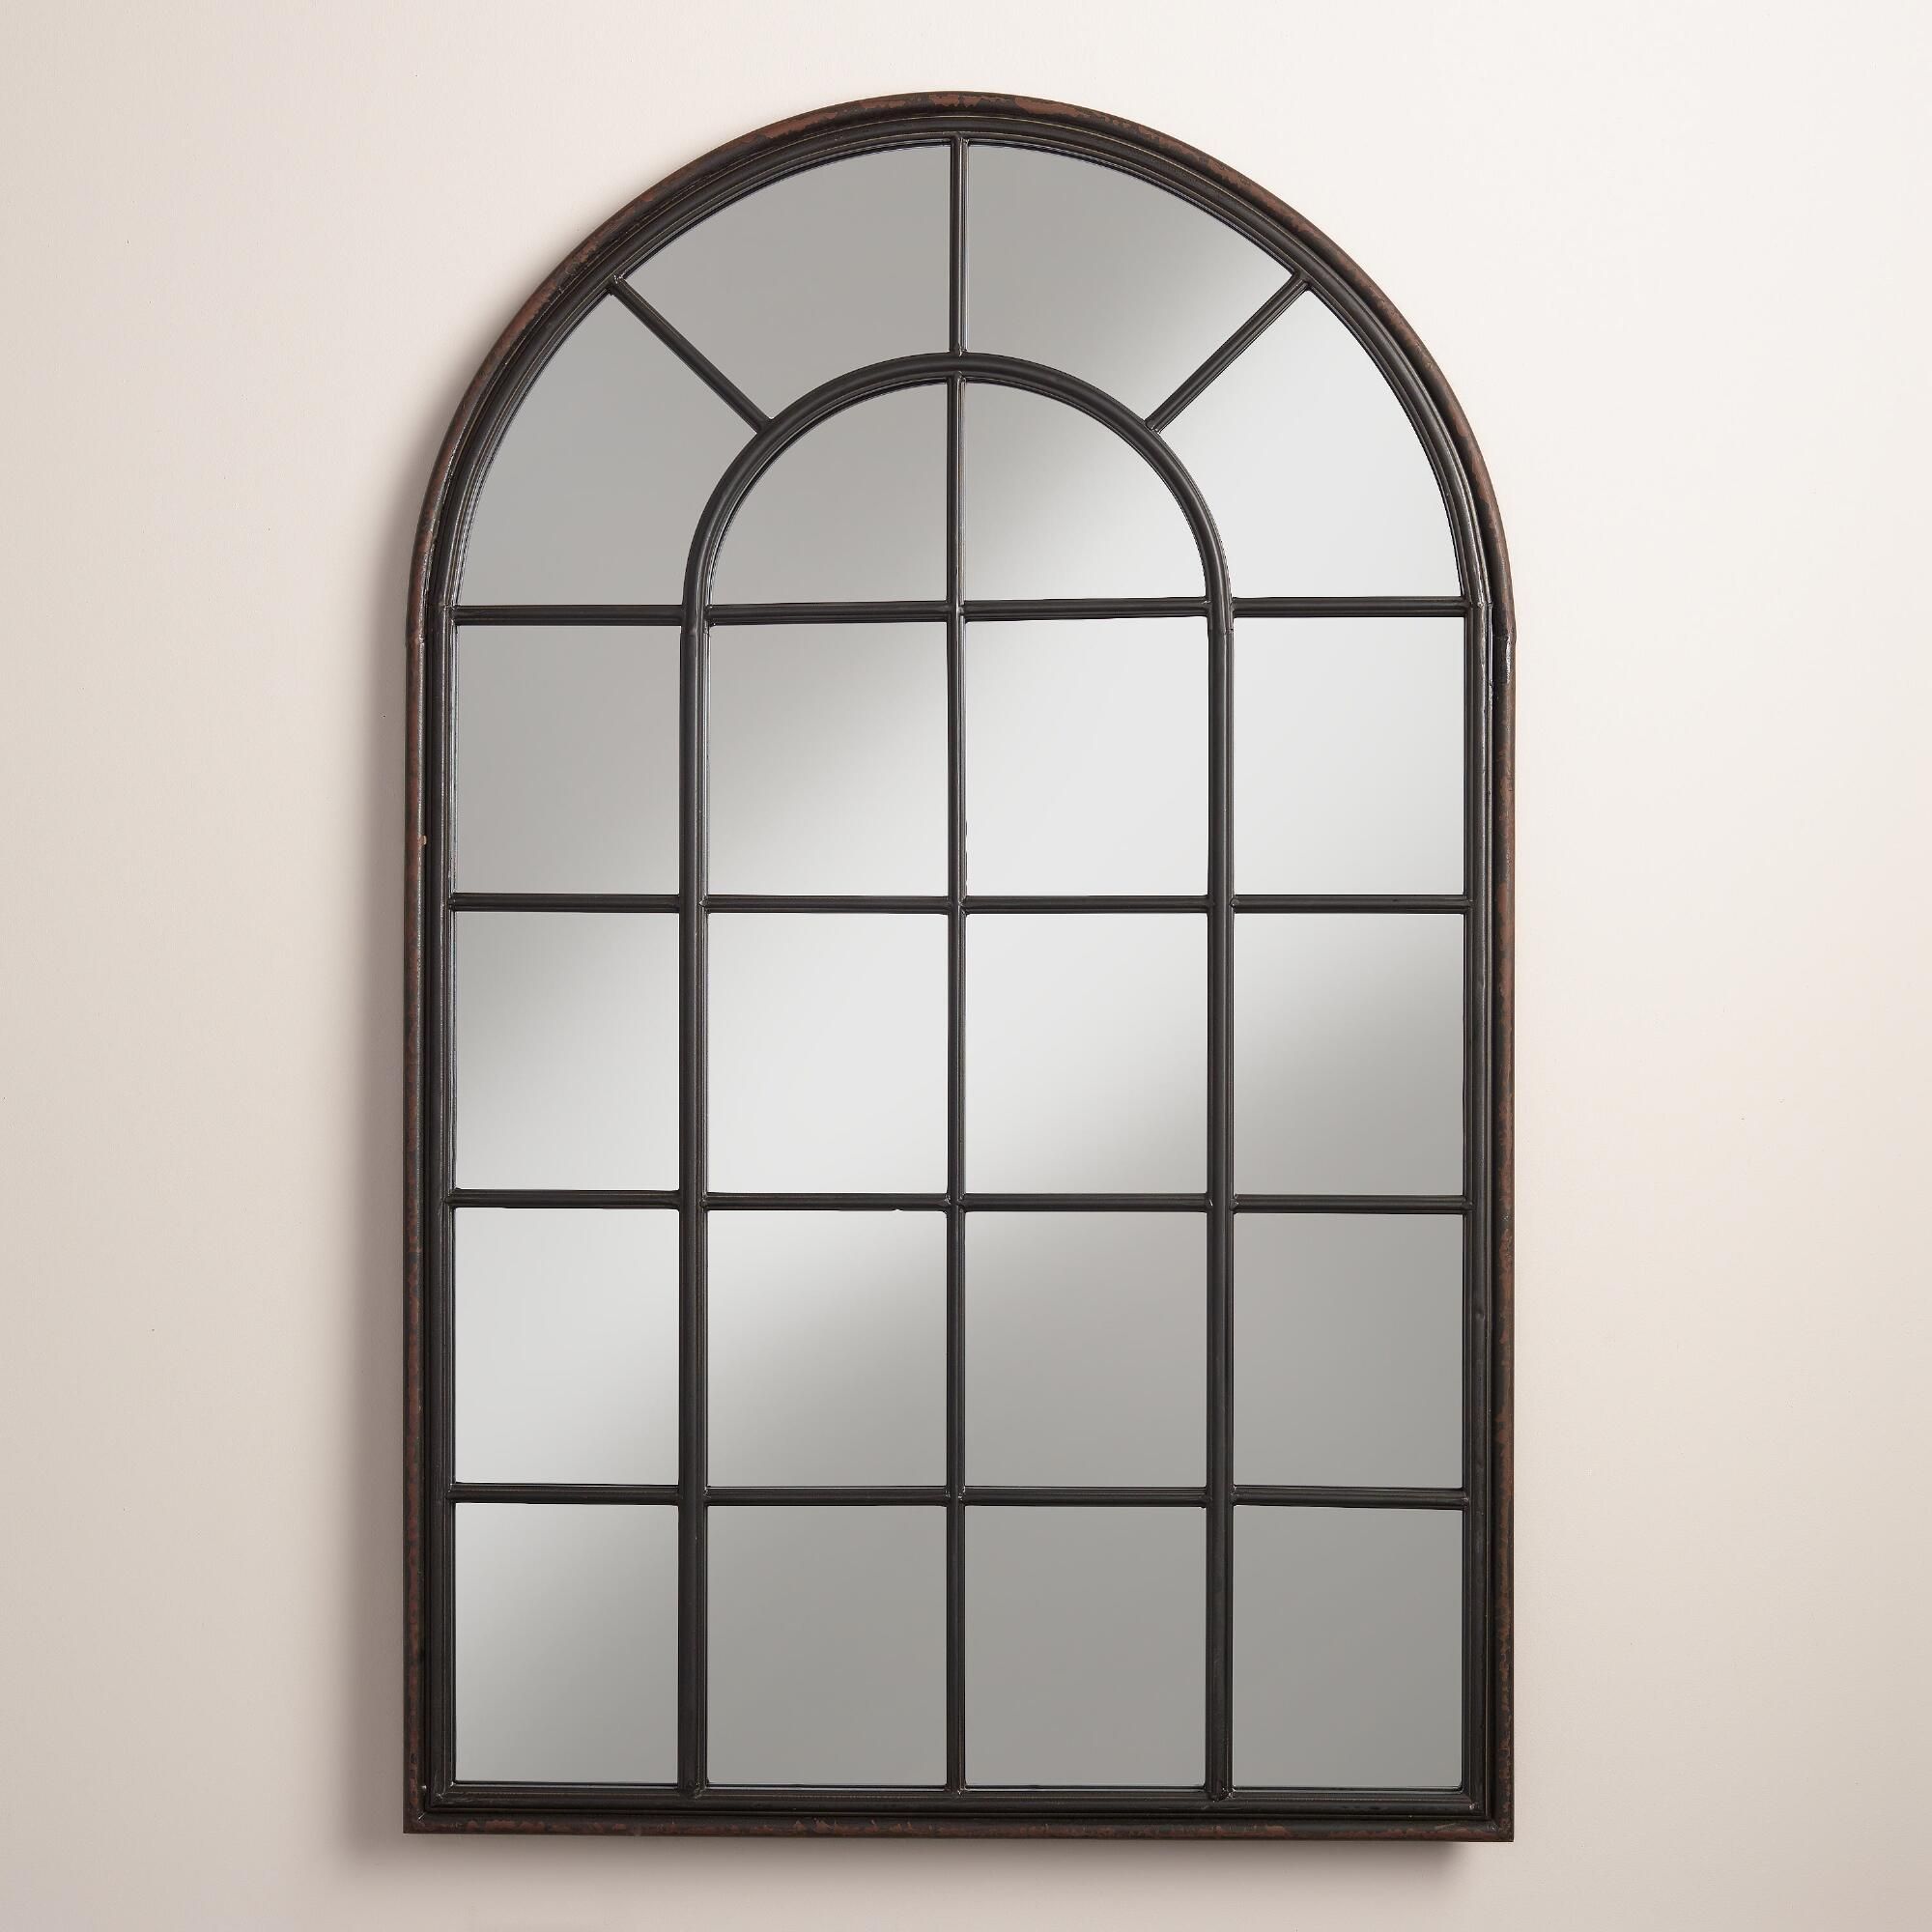 Large Mirror Over Fireplace New Our Window Inspired Iron Mirror Features A Broad Arch and An